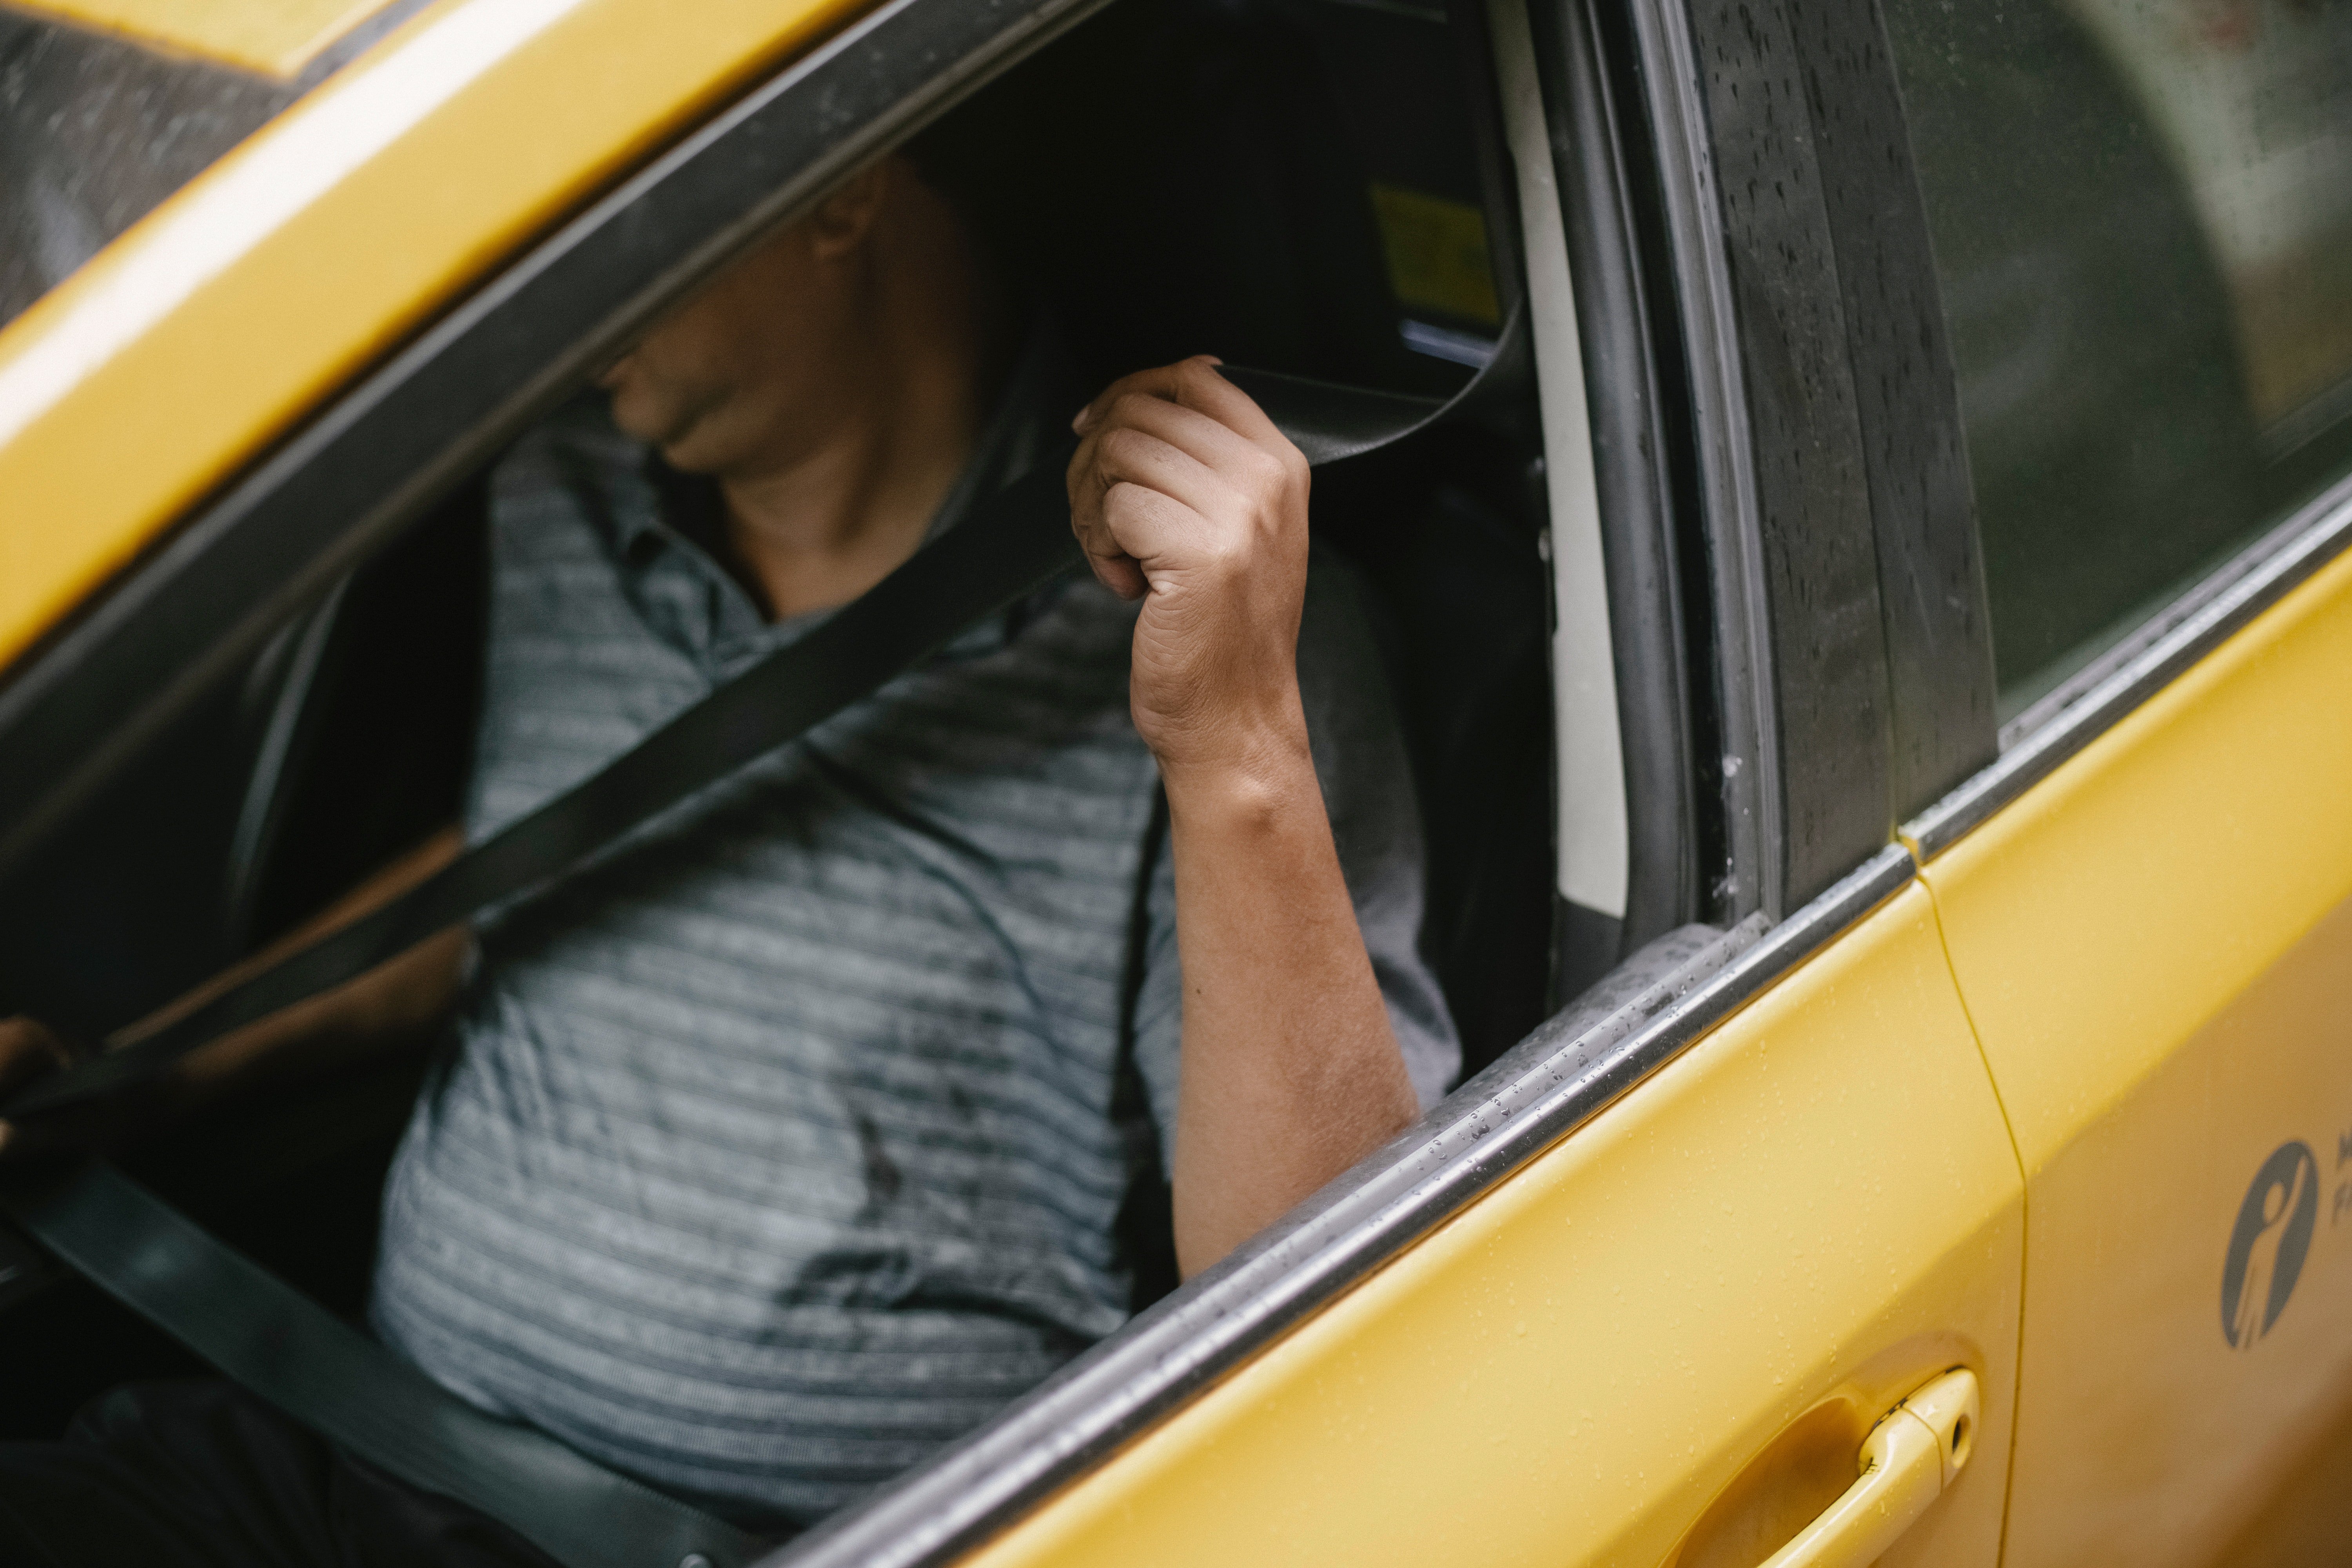 A taxi driver putting on his seatbelt | Source: Pexels